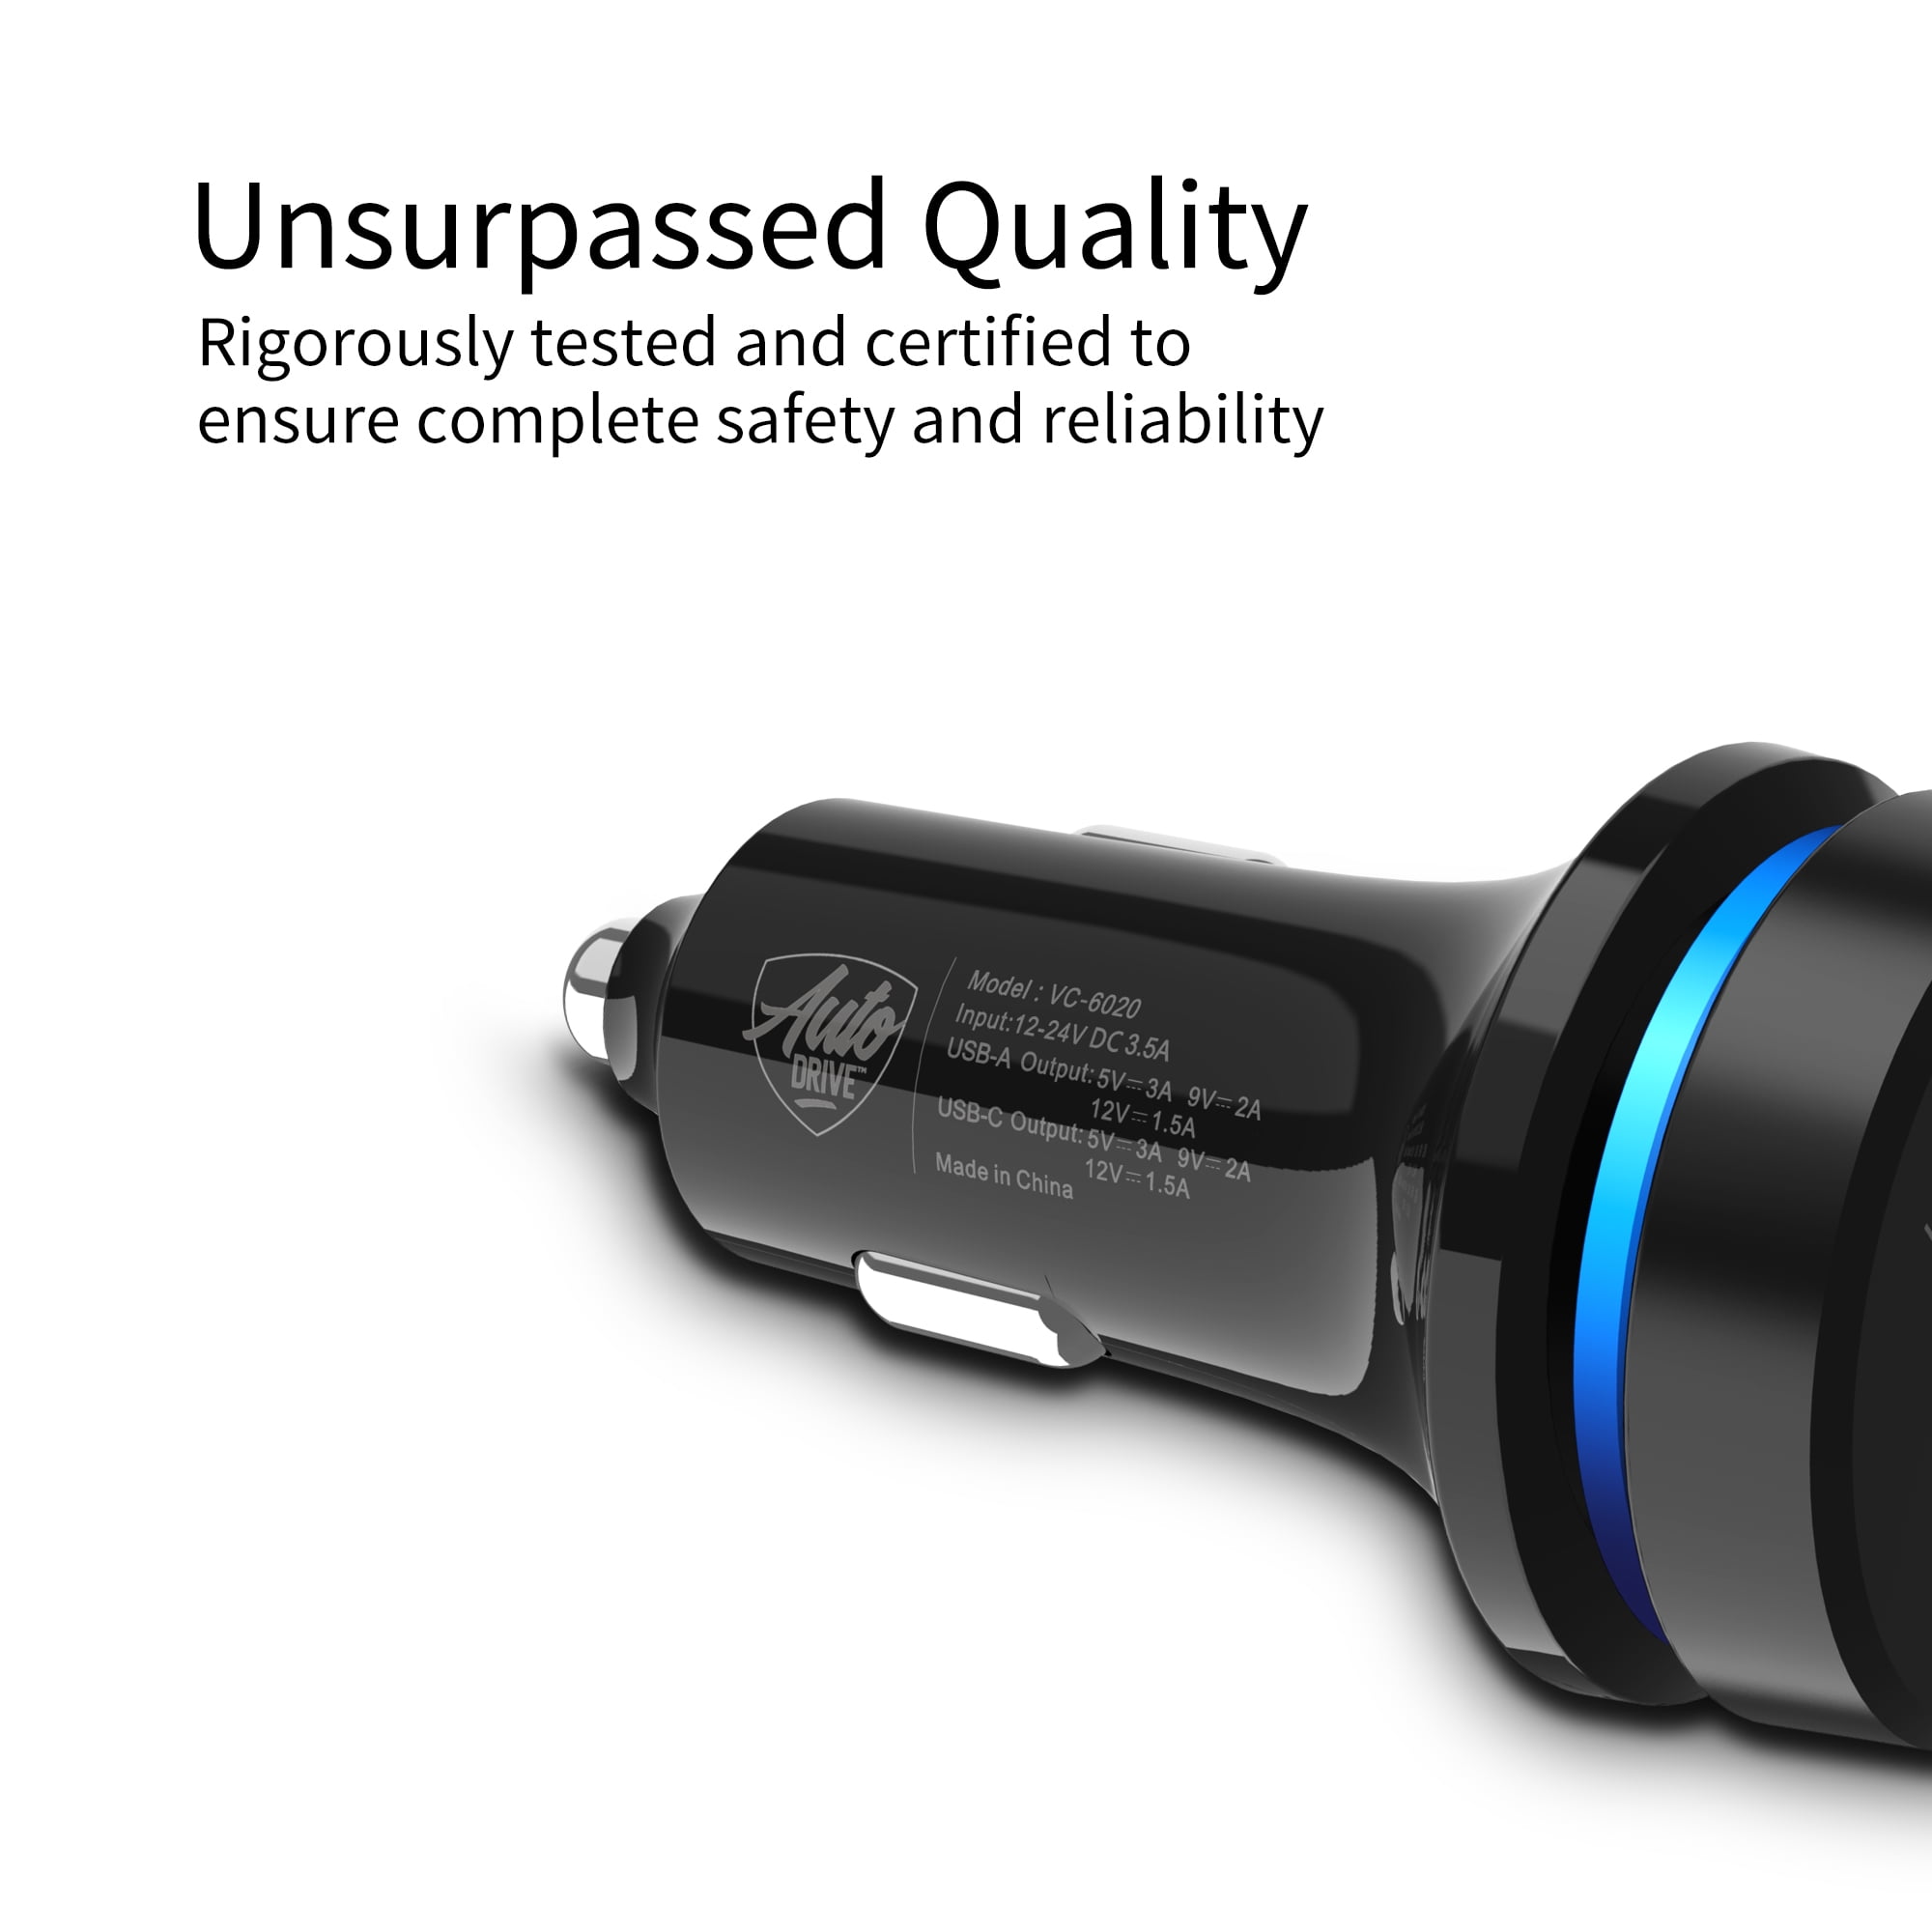 Auto Drive Quick Charge 3.0 USB Car Charger with Pulsing Light, Dual USB Type A and USB Type C Charging Ports